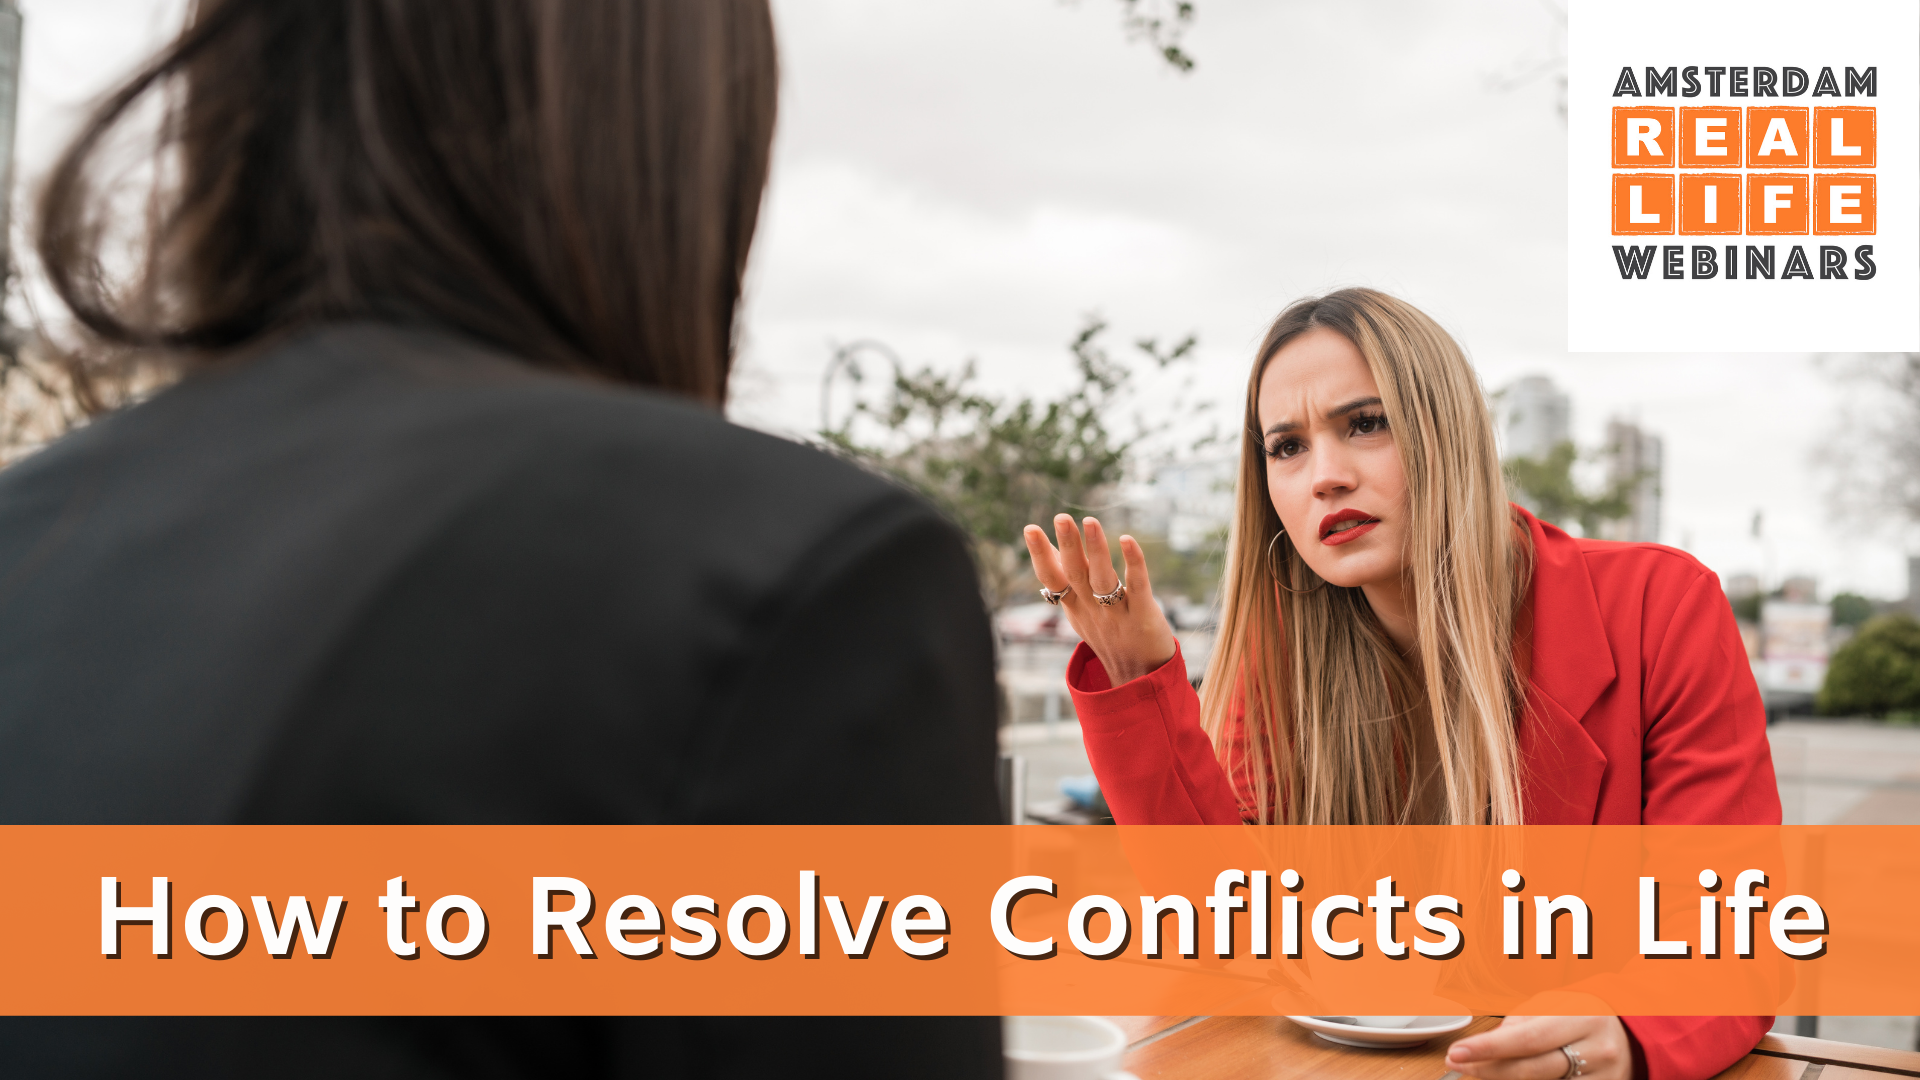 How to Resolve Conflicts in Life